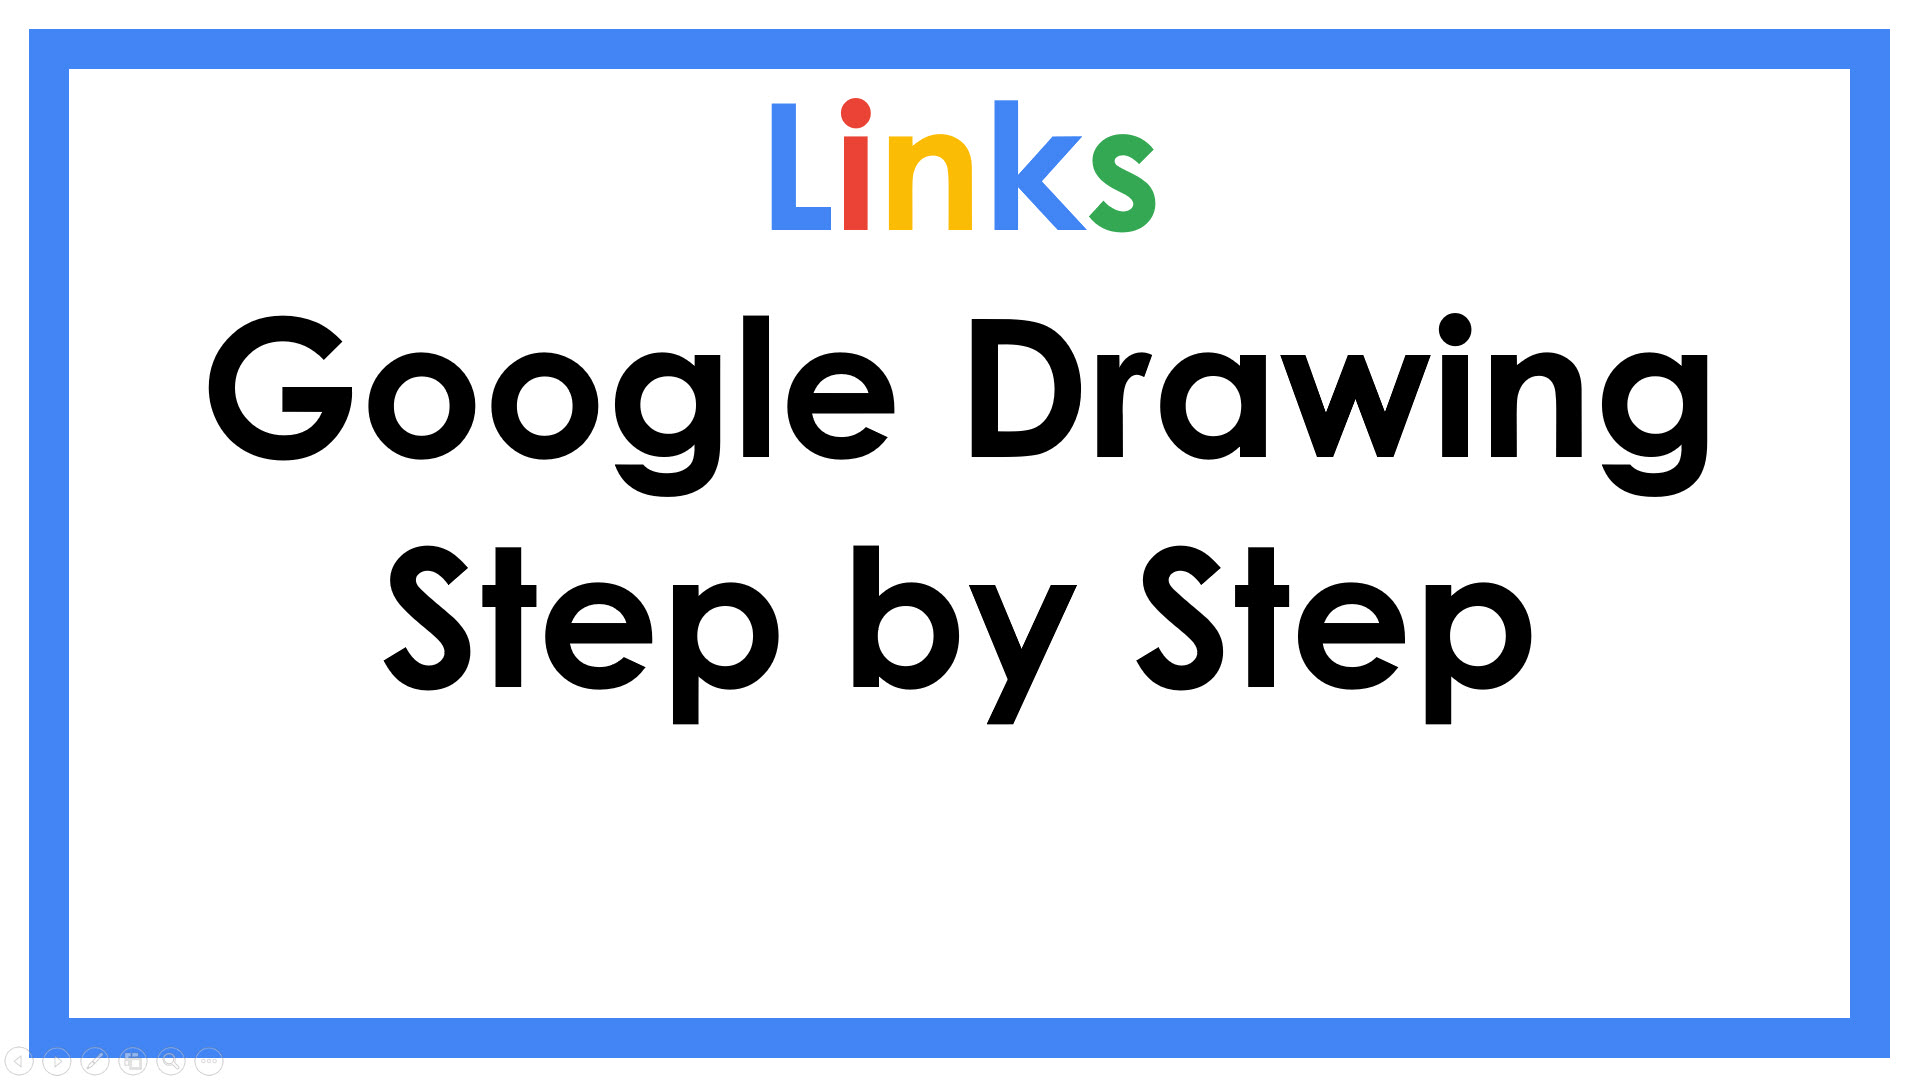 Google Drawing Step by Step